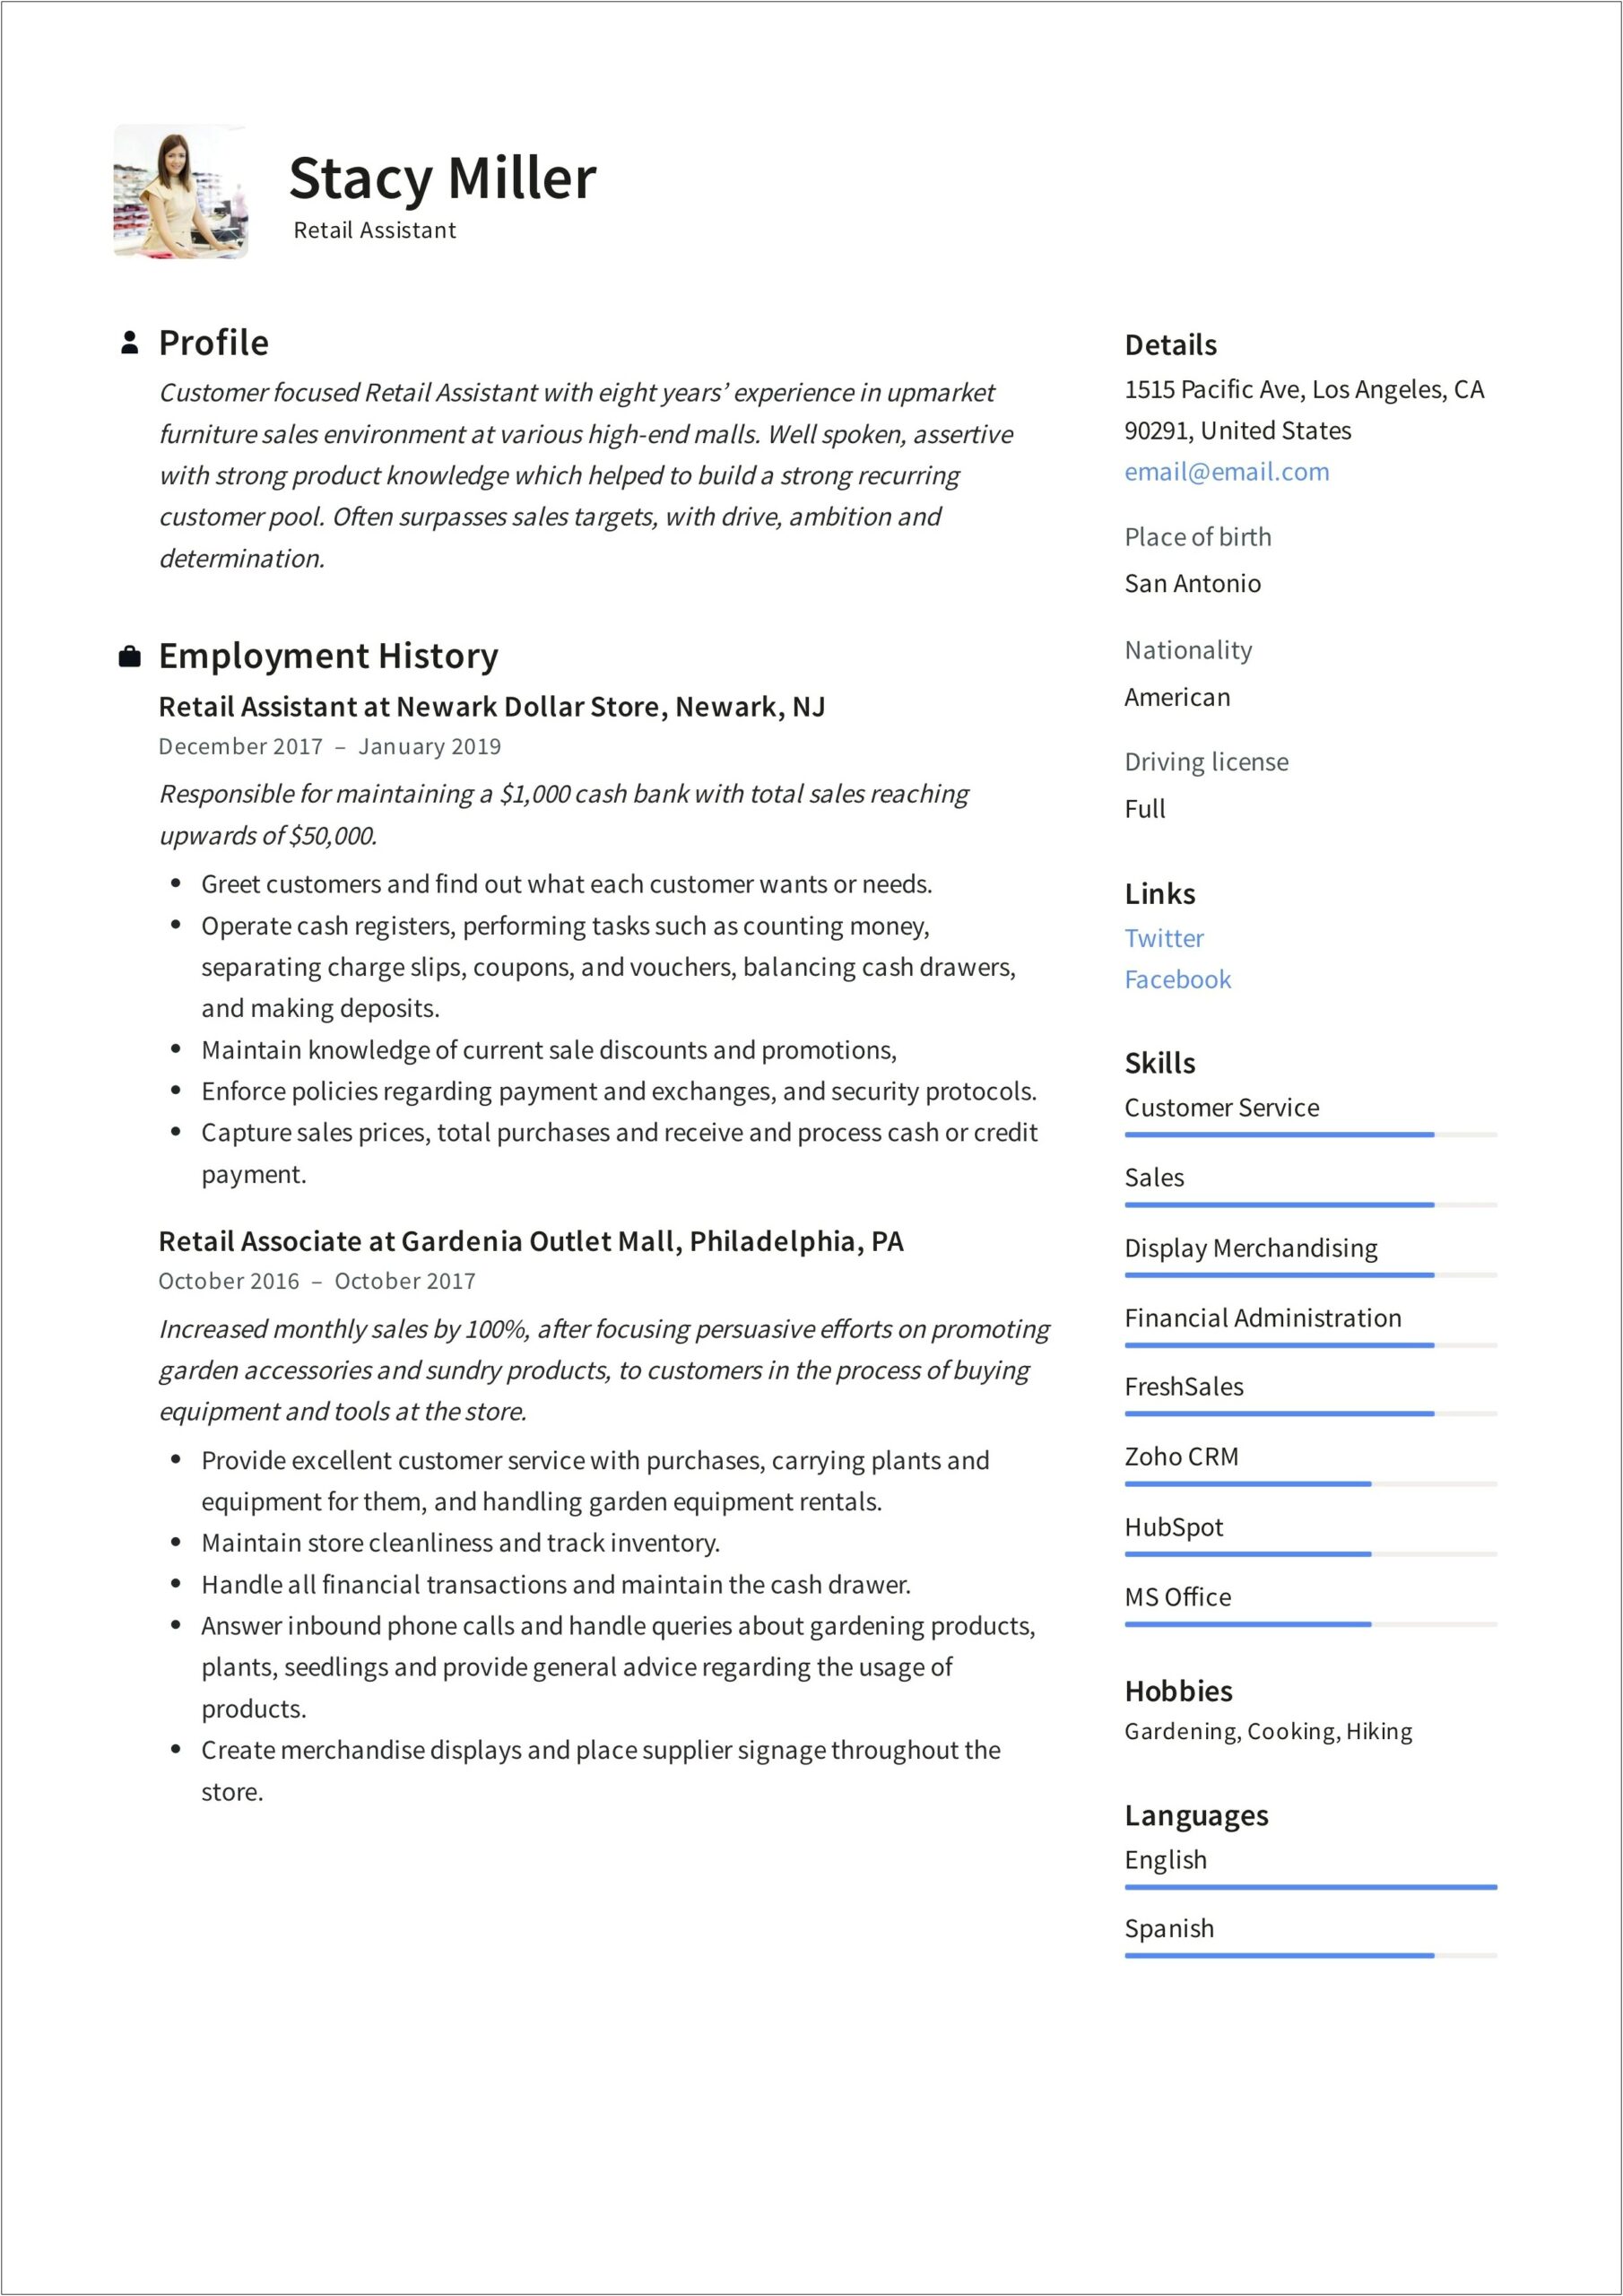 Resume Summary Examples For Retail Sales